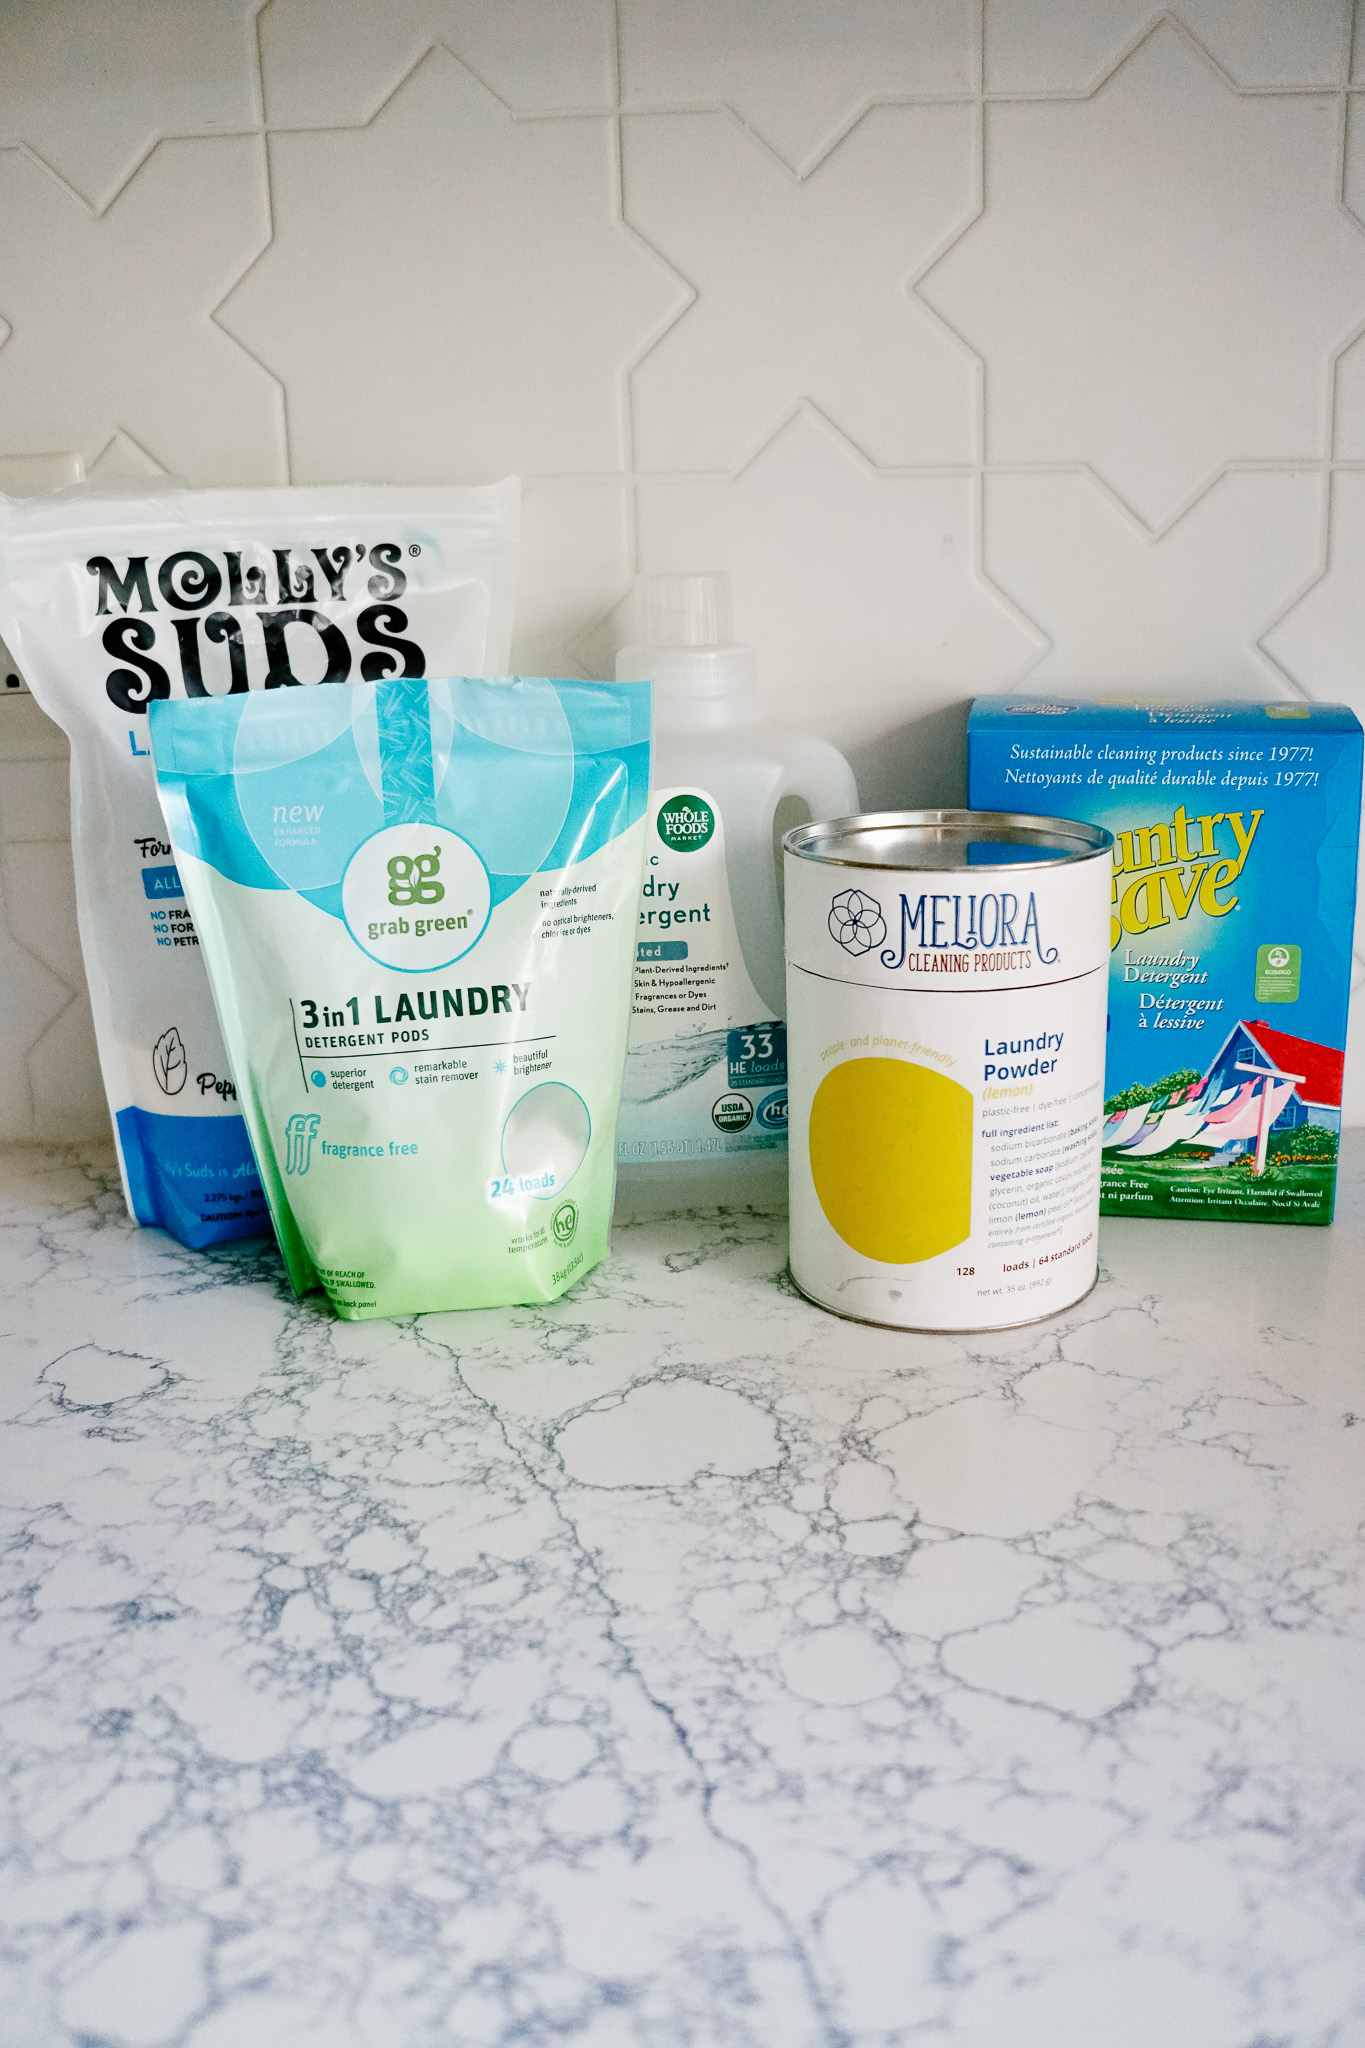 Buying Guide, Molly's Suds Original Laundry Detergent Powder